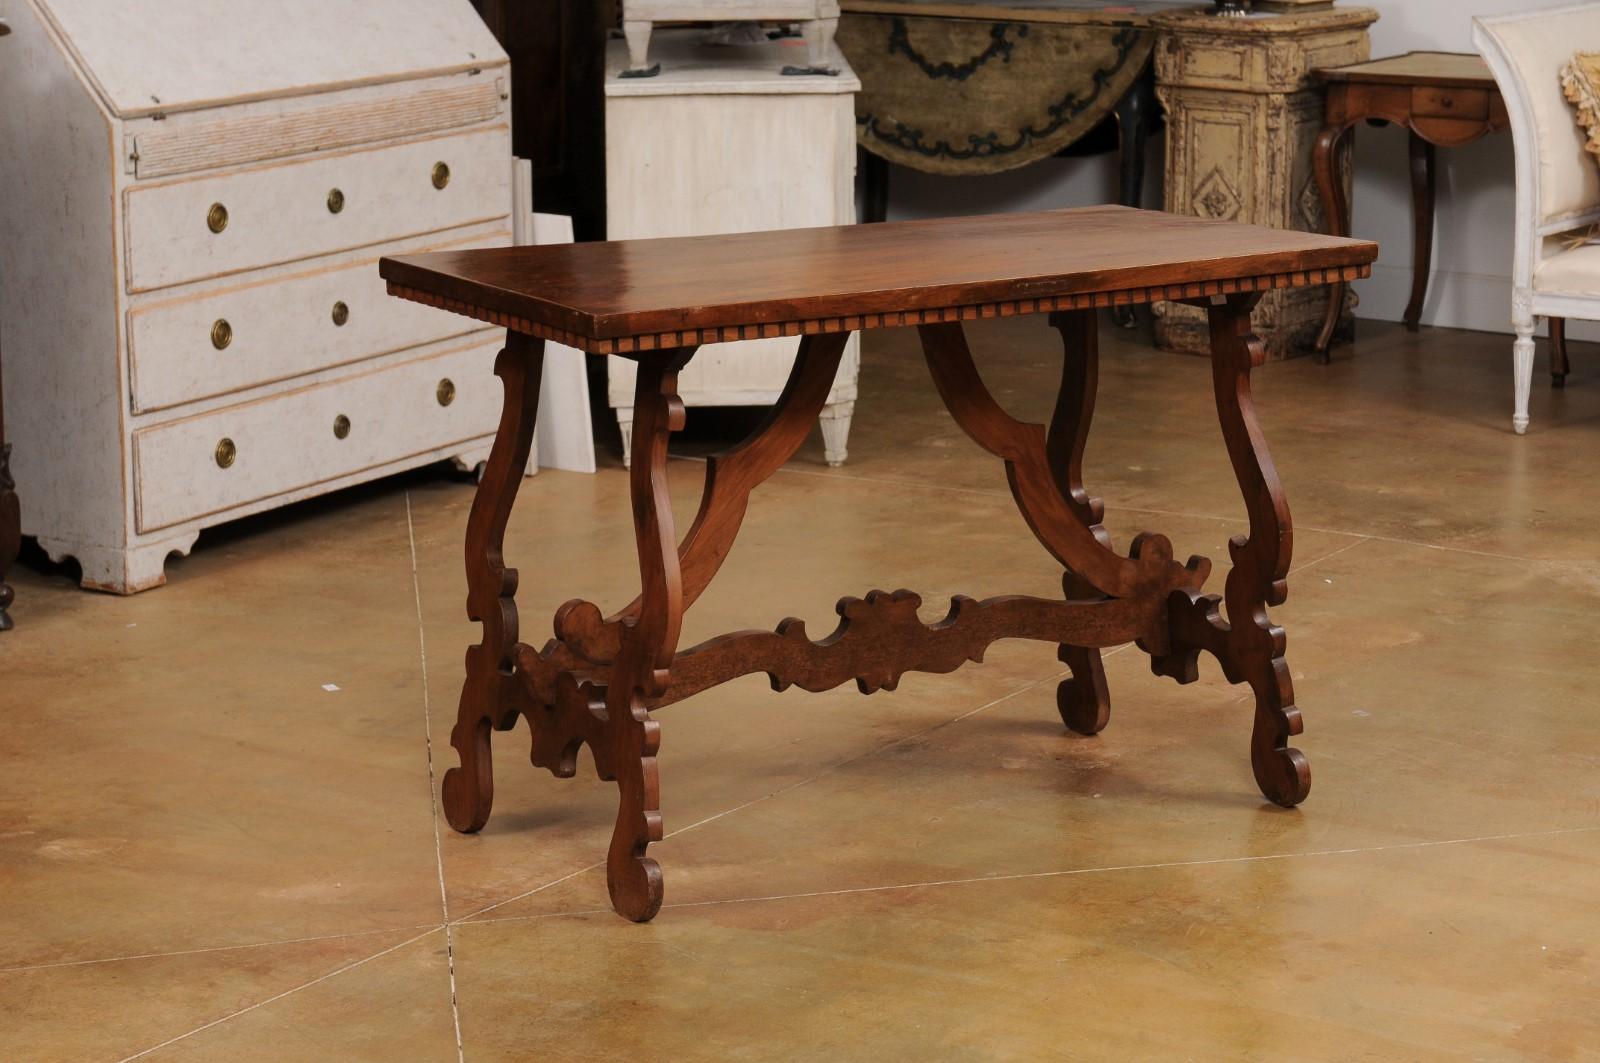 An Italian Baroque style Fratino walnut console table from the 20th century, with dentil molding, lyre-shaped base and carved stretchers. Created in Italy during the 20th century, this Fratino walnut console table features a simple rectangular top